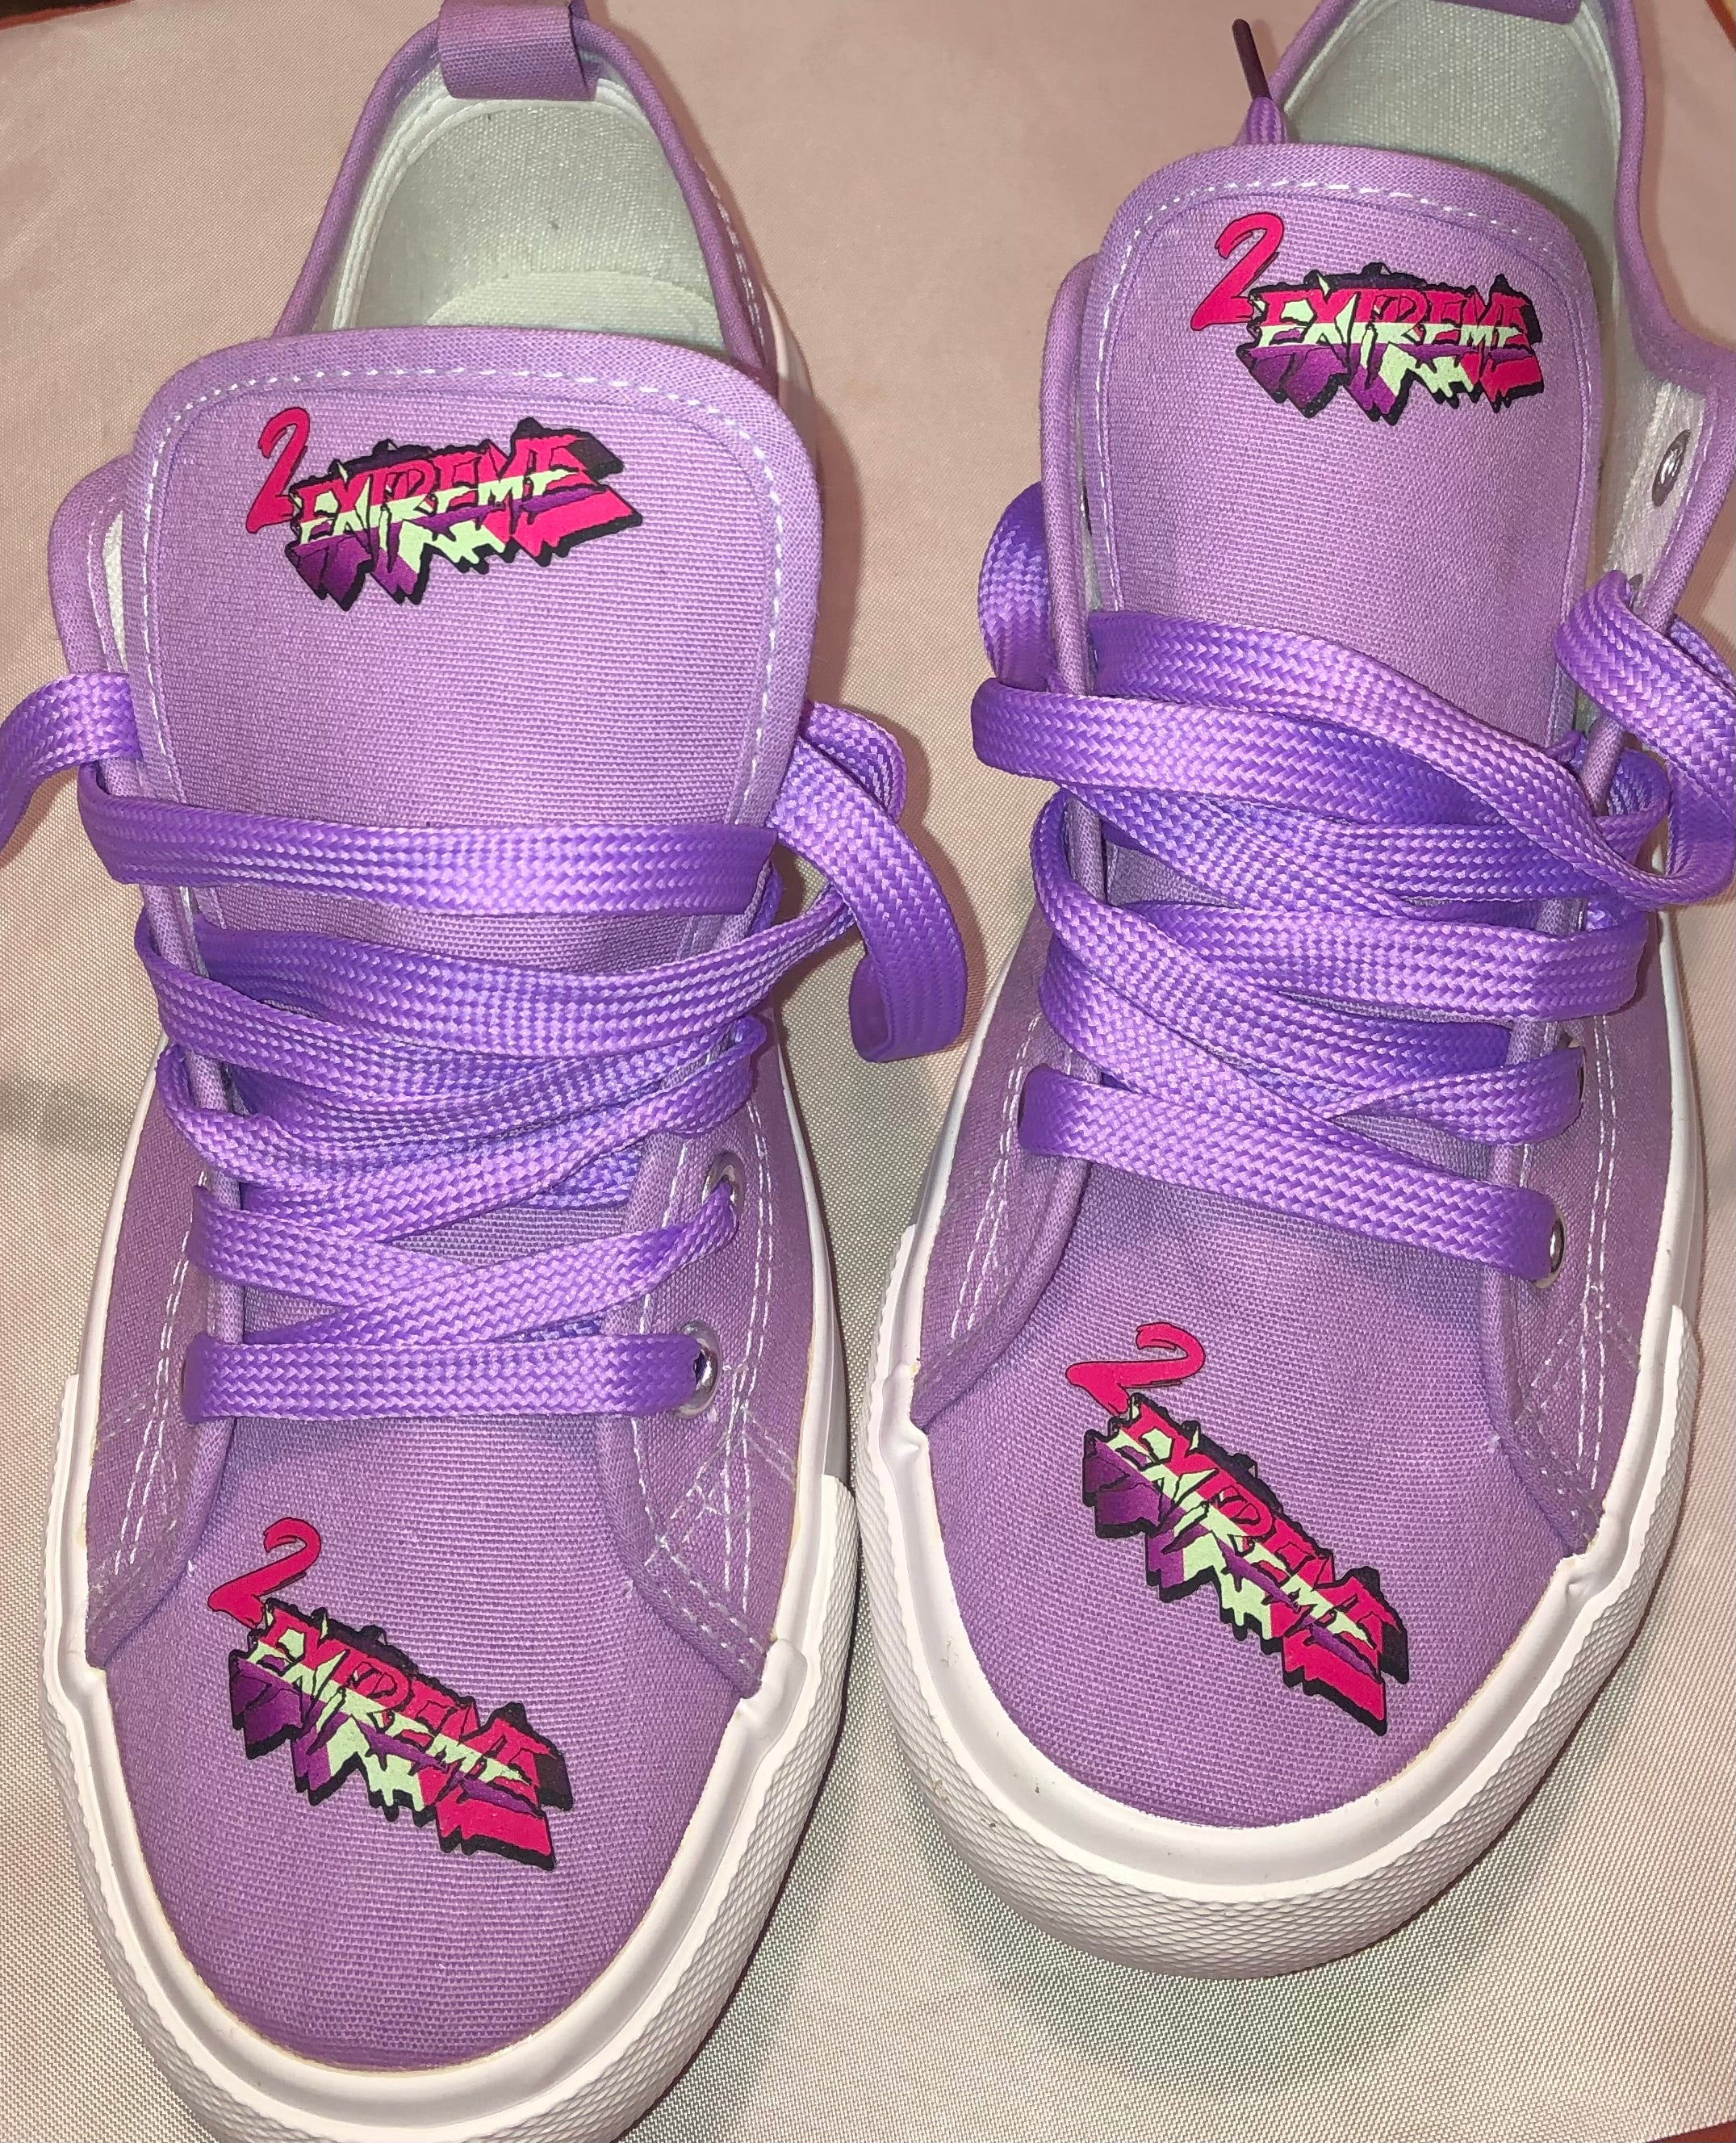 2extreme- Purple Canvas Sneakers